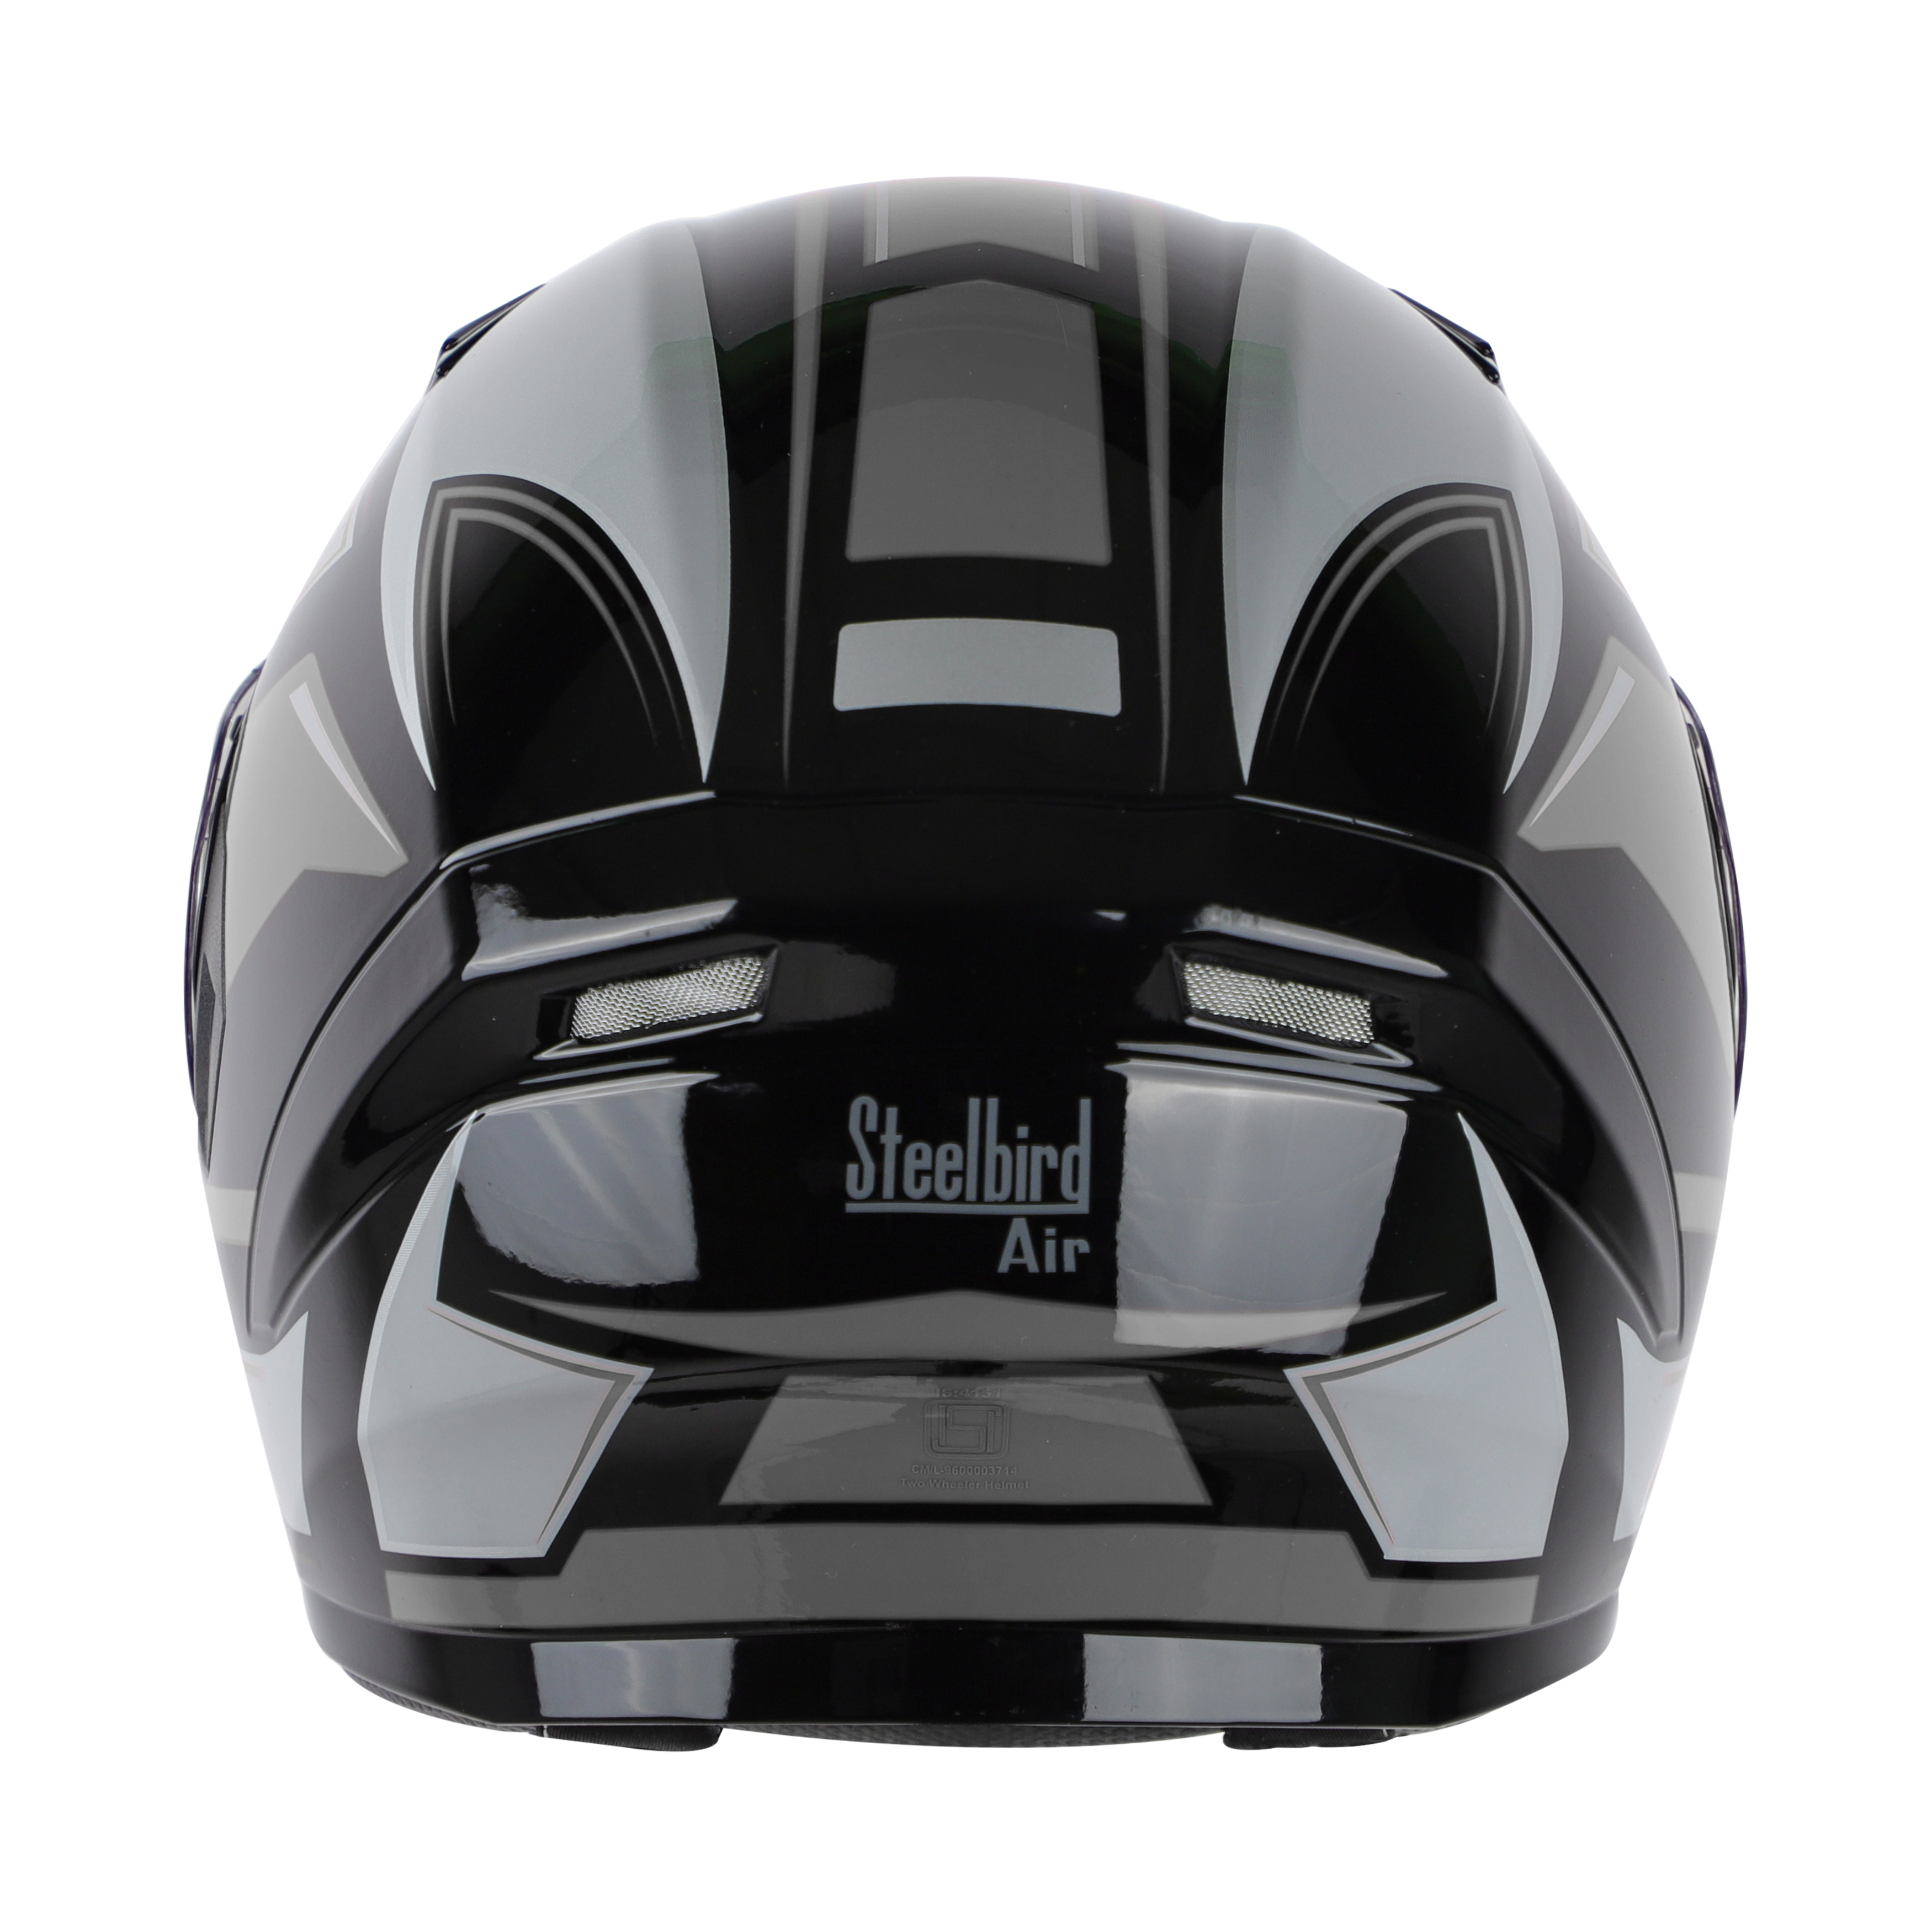 SBA-21 AIR CARBON GLOSSY BLACK WITH GREY